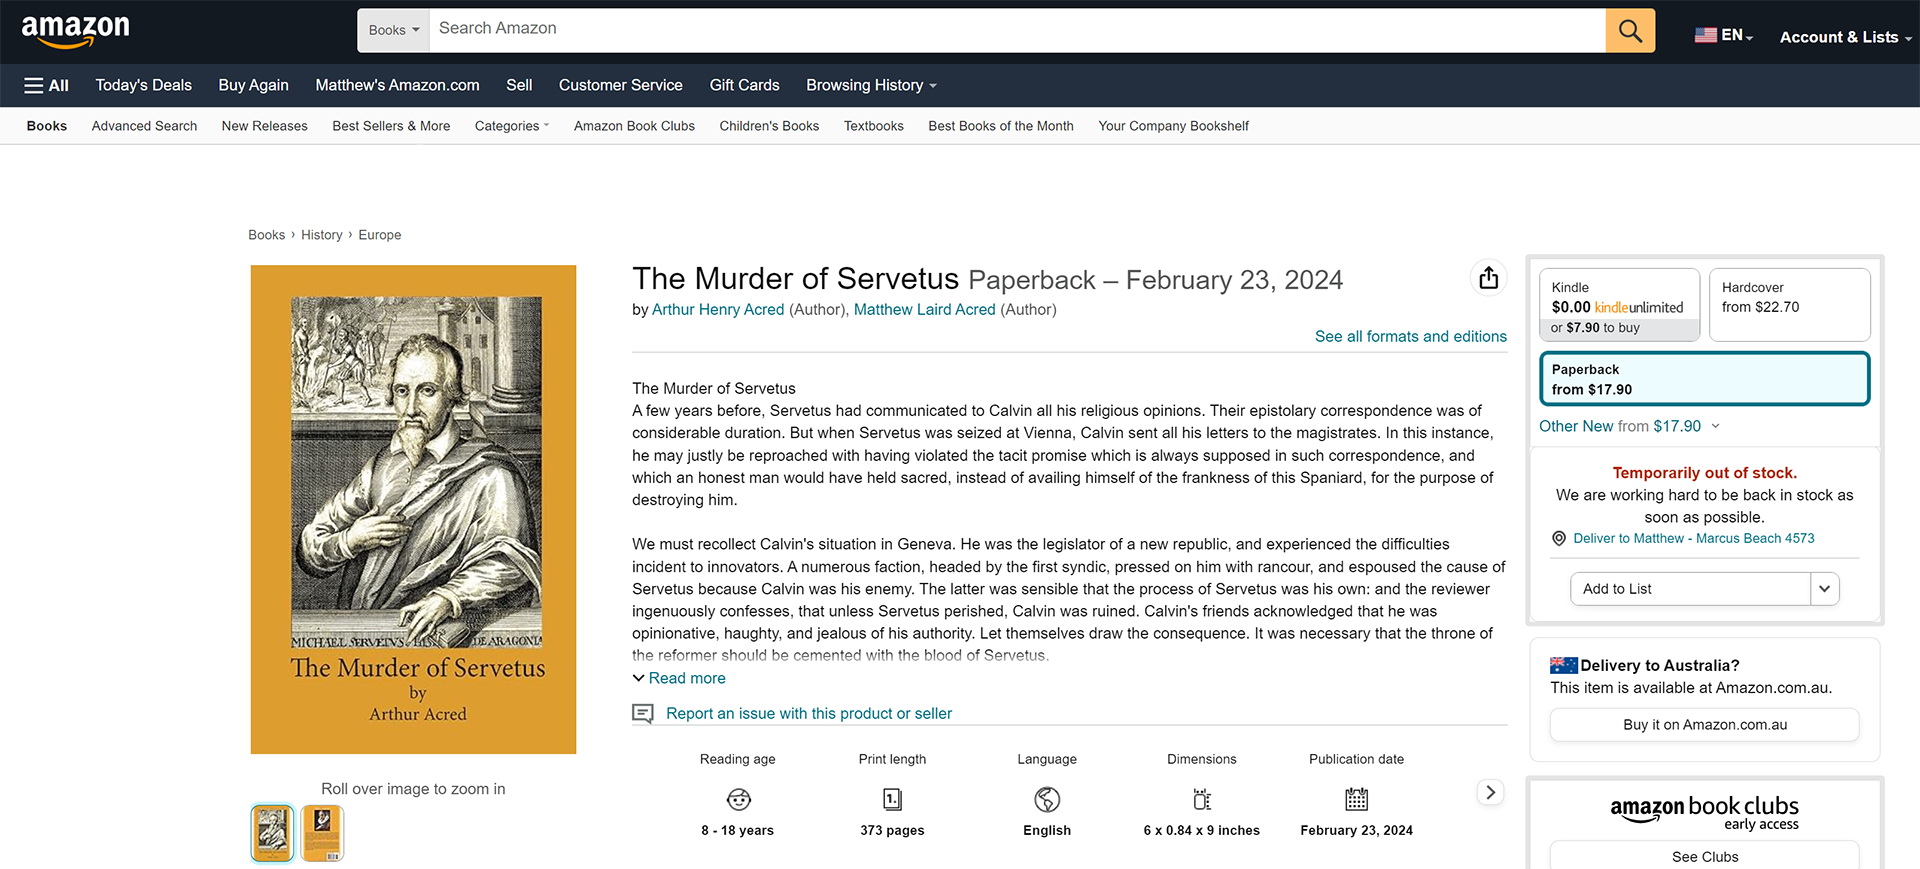 The Murder of Servetus Paperback foresale on Amazon